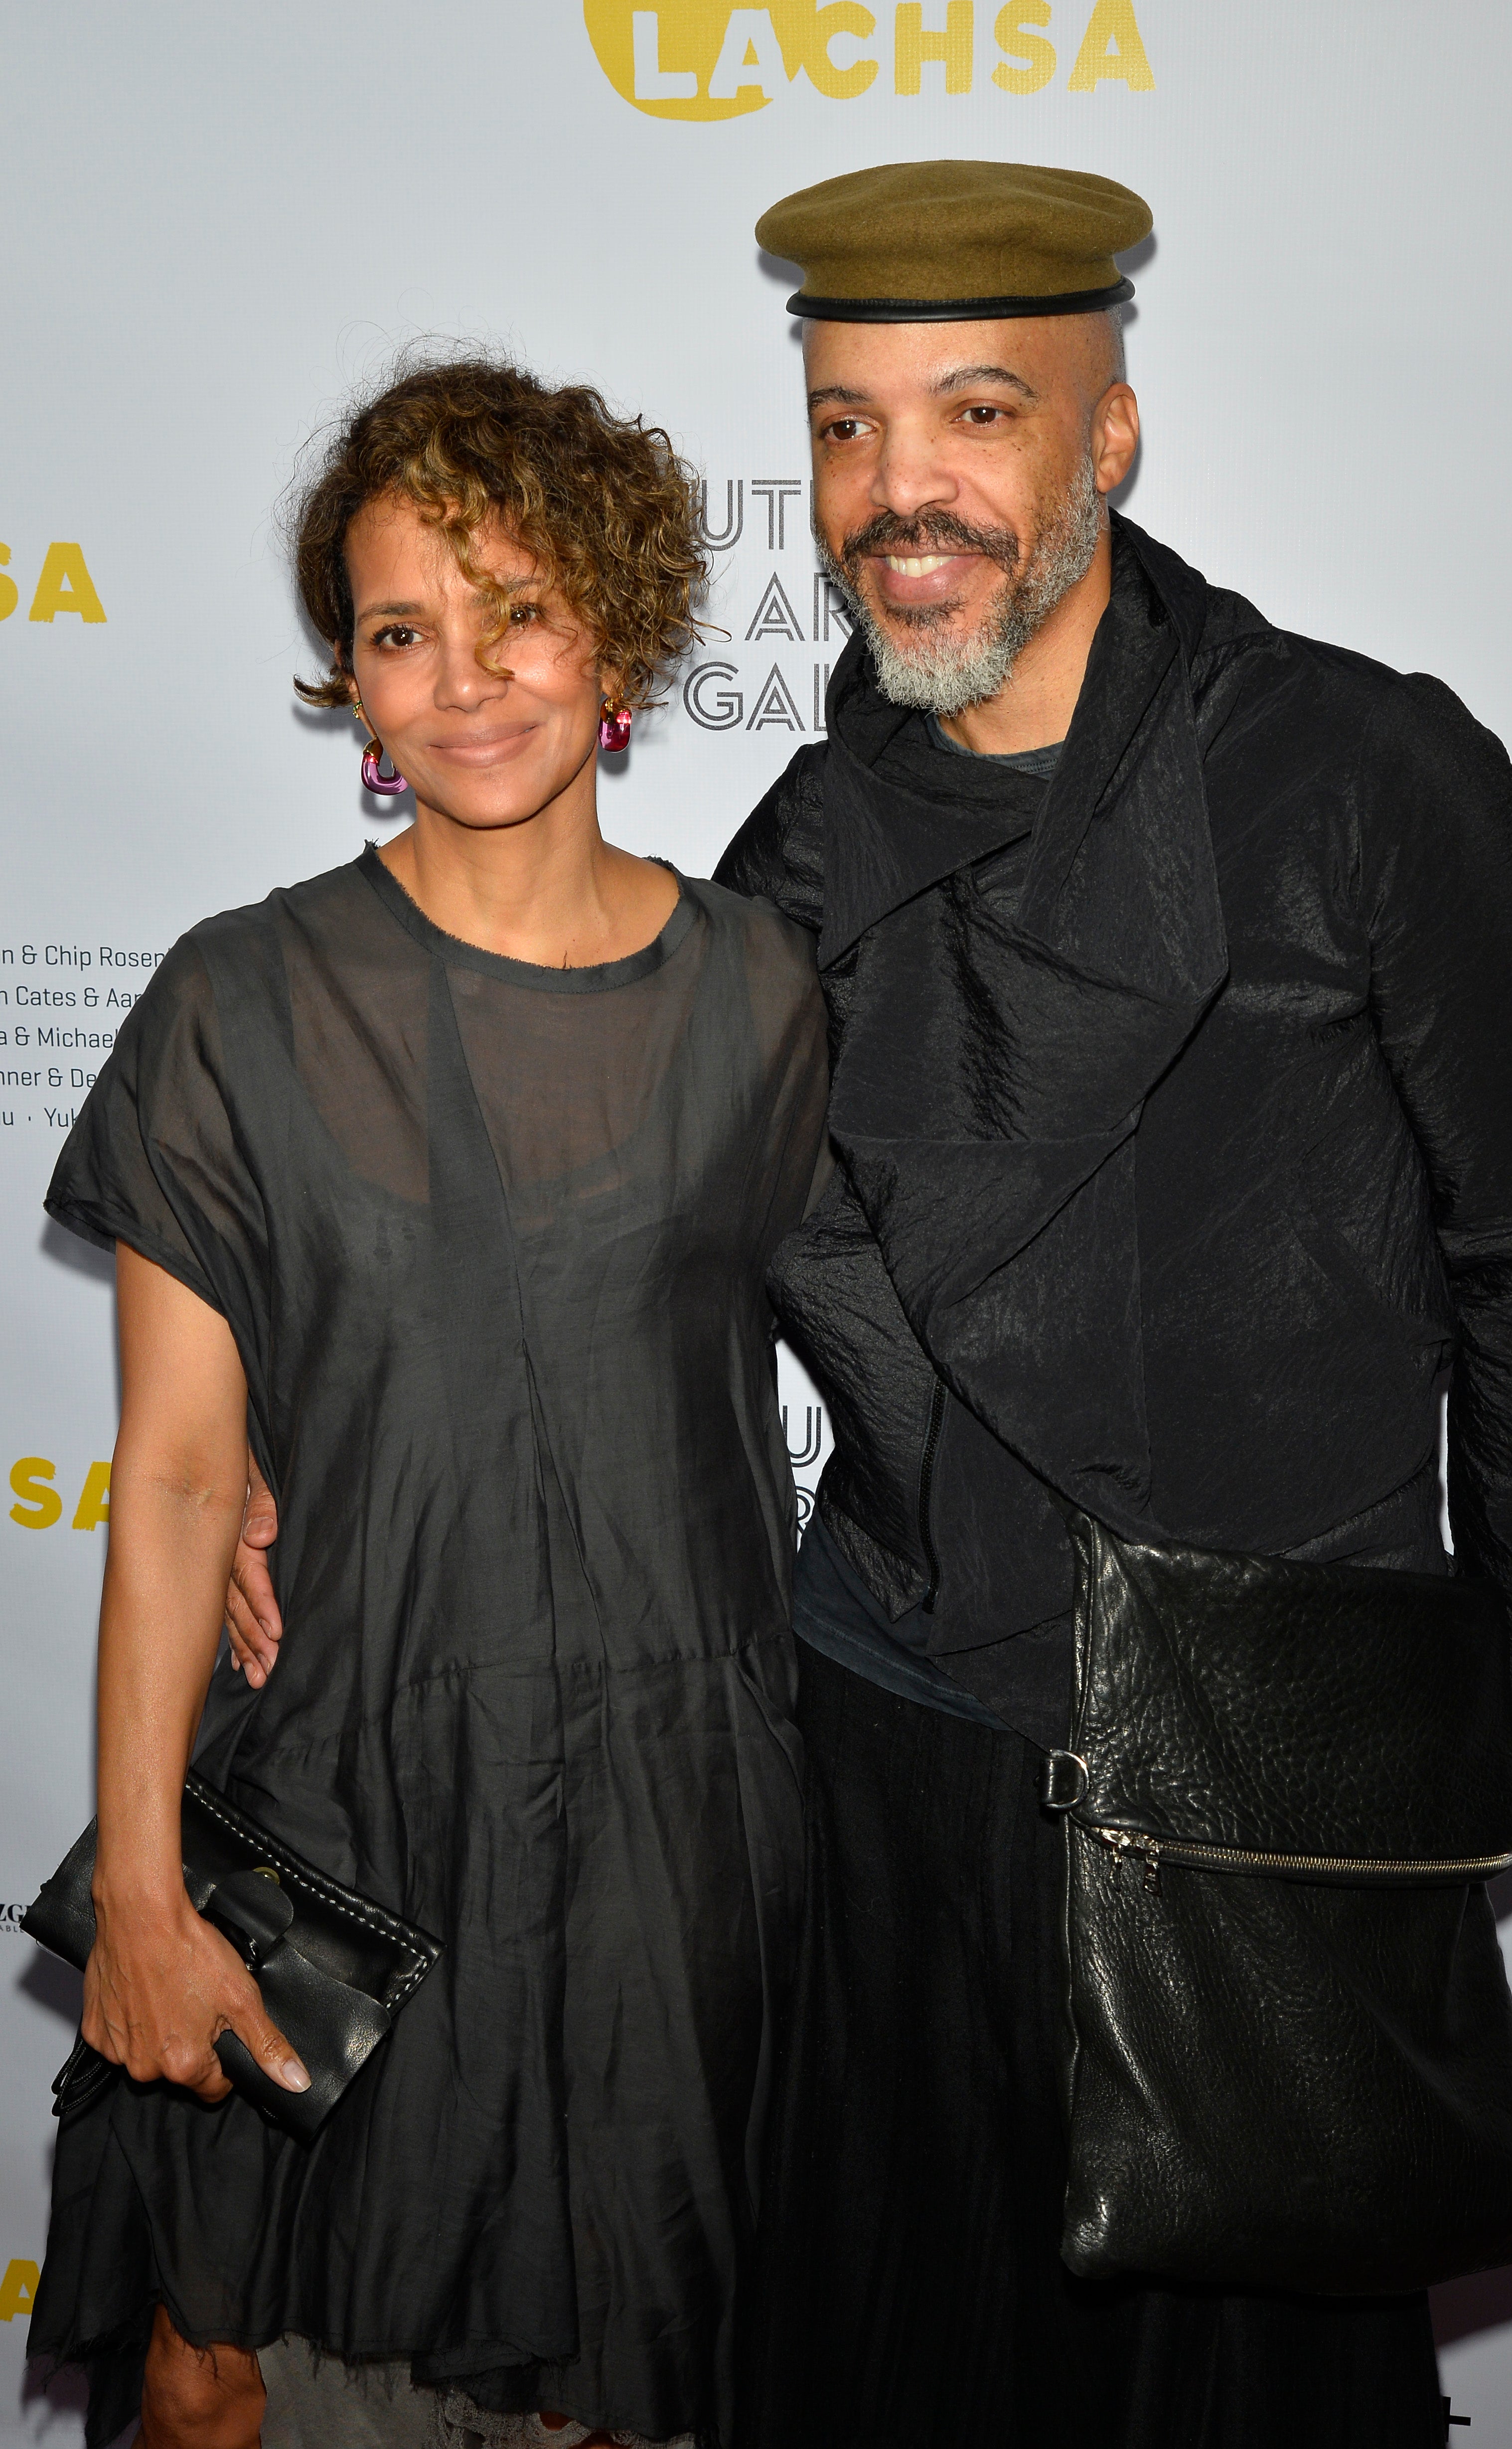 his arm around halle as they pose at an event